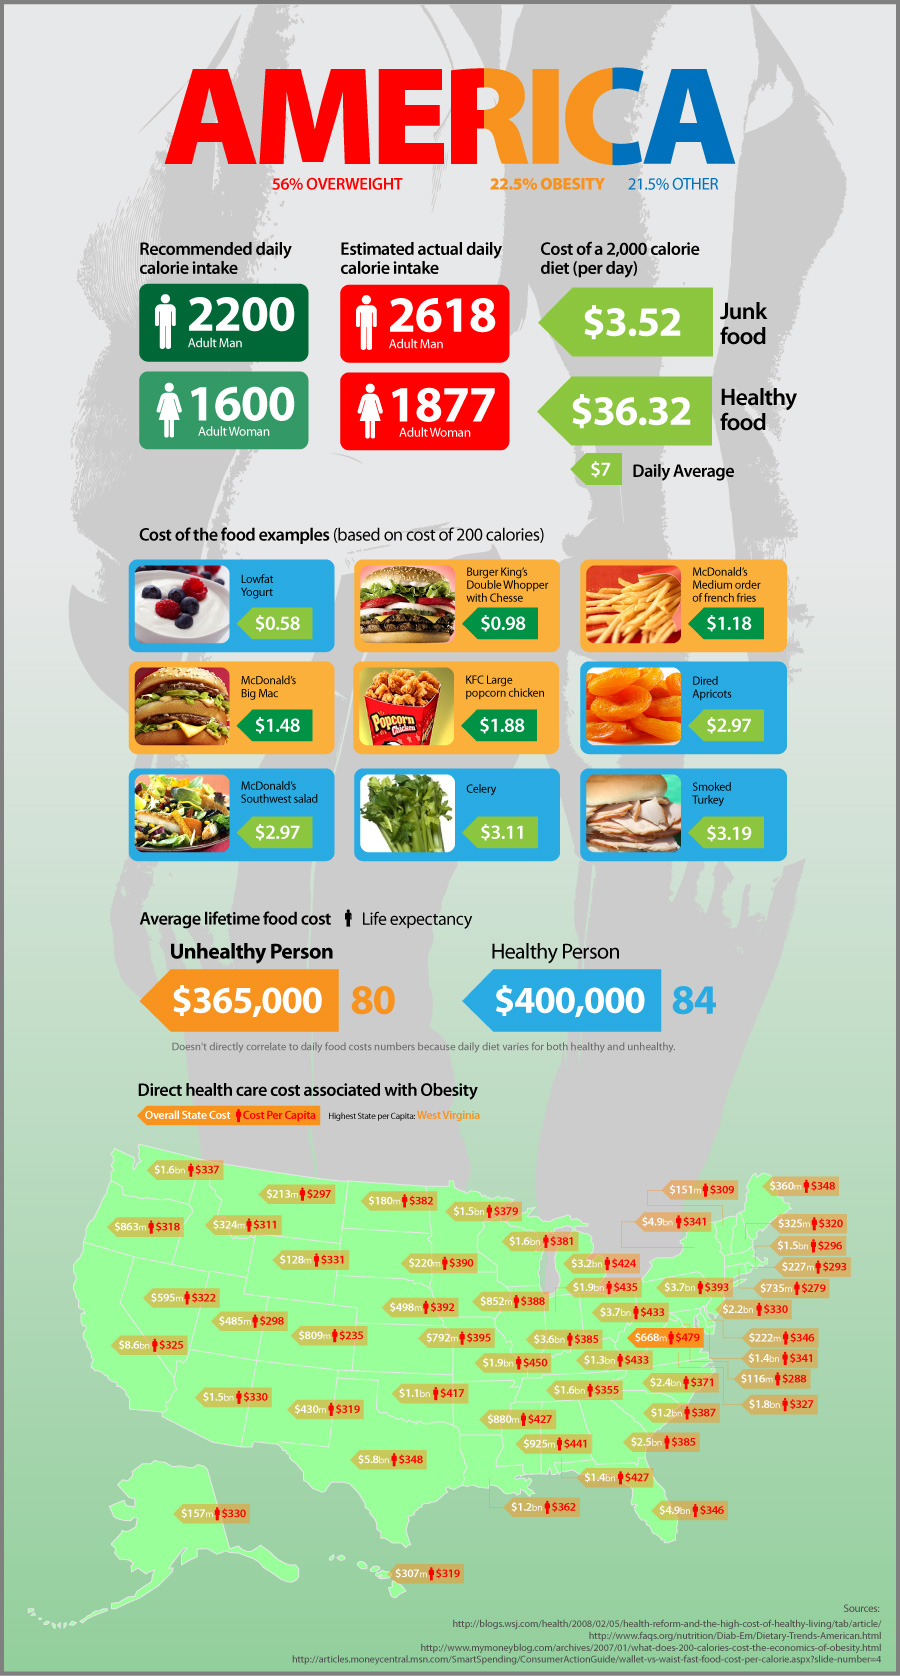 The Cost of Living: Healthy vs. Unhealthy